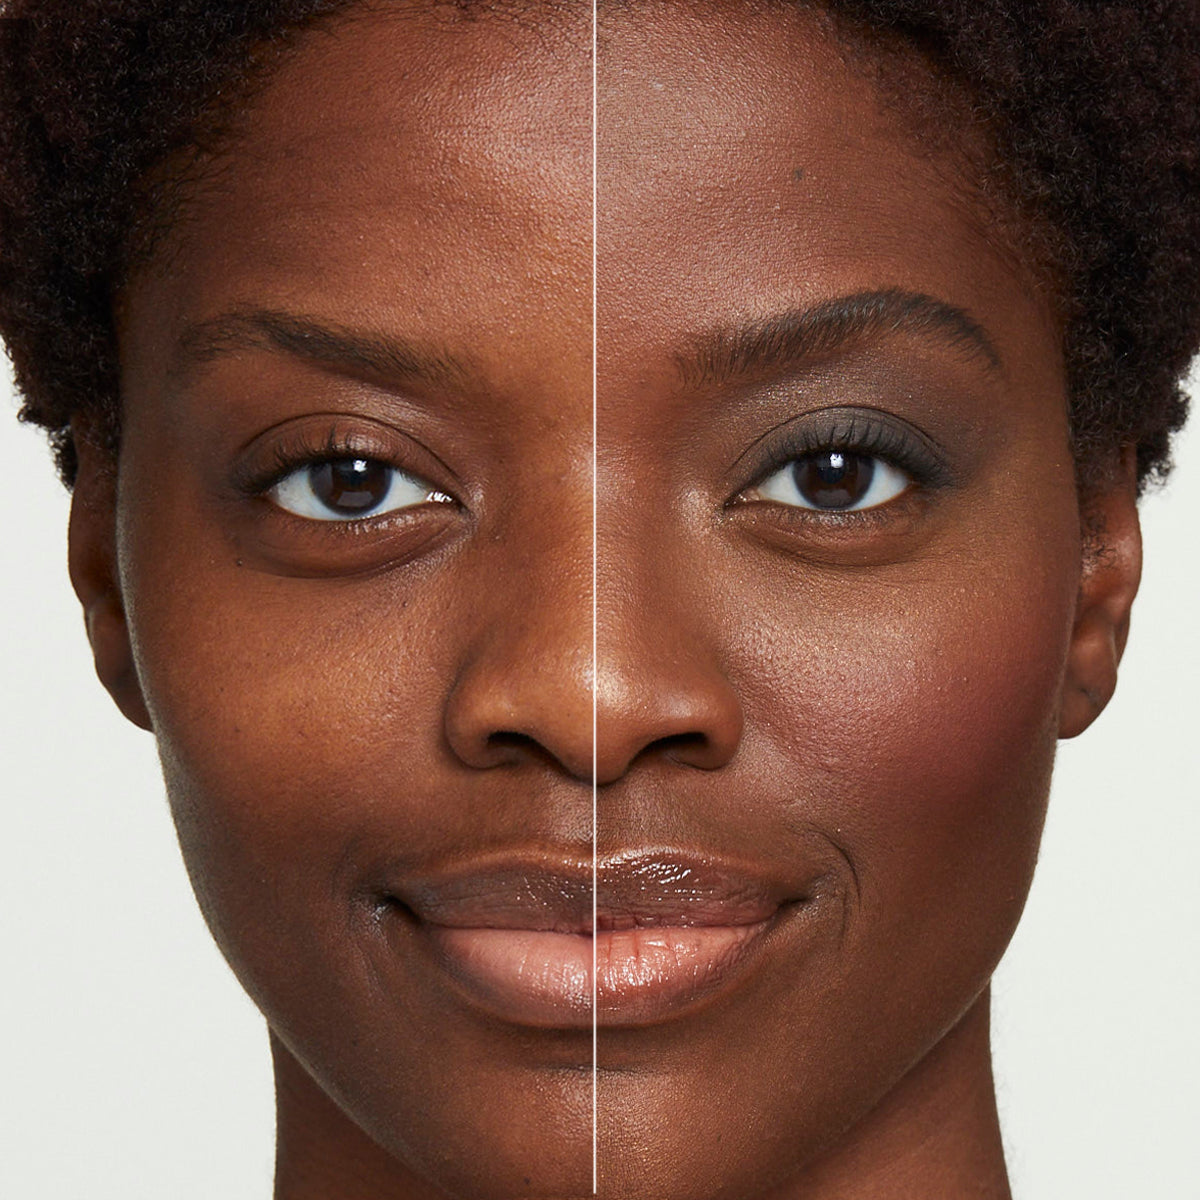 a side by side before and after of a model showing how effectively the products in Fold Out Face cover blemishes, add natural-looking color and create a smooth, beautiful skin tone